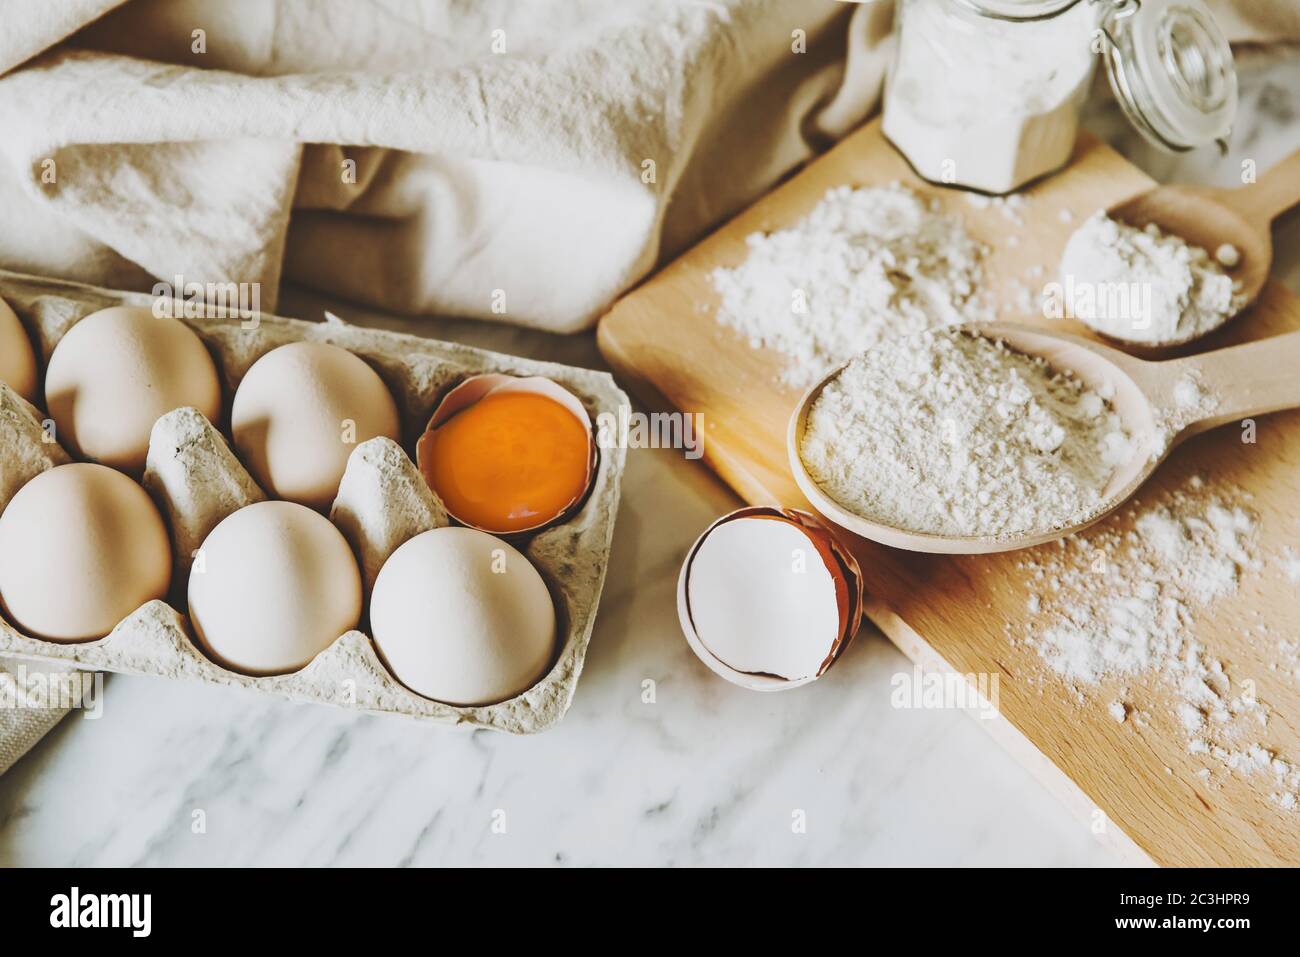 Baking utensils and baking ingredients with eggs, wheat flour, egg yolks for pastry. Cake, pasta or dough recipe ingredients. Top view on table Stock Photo